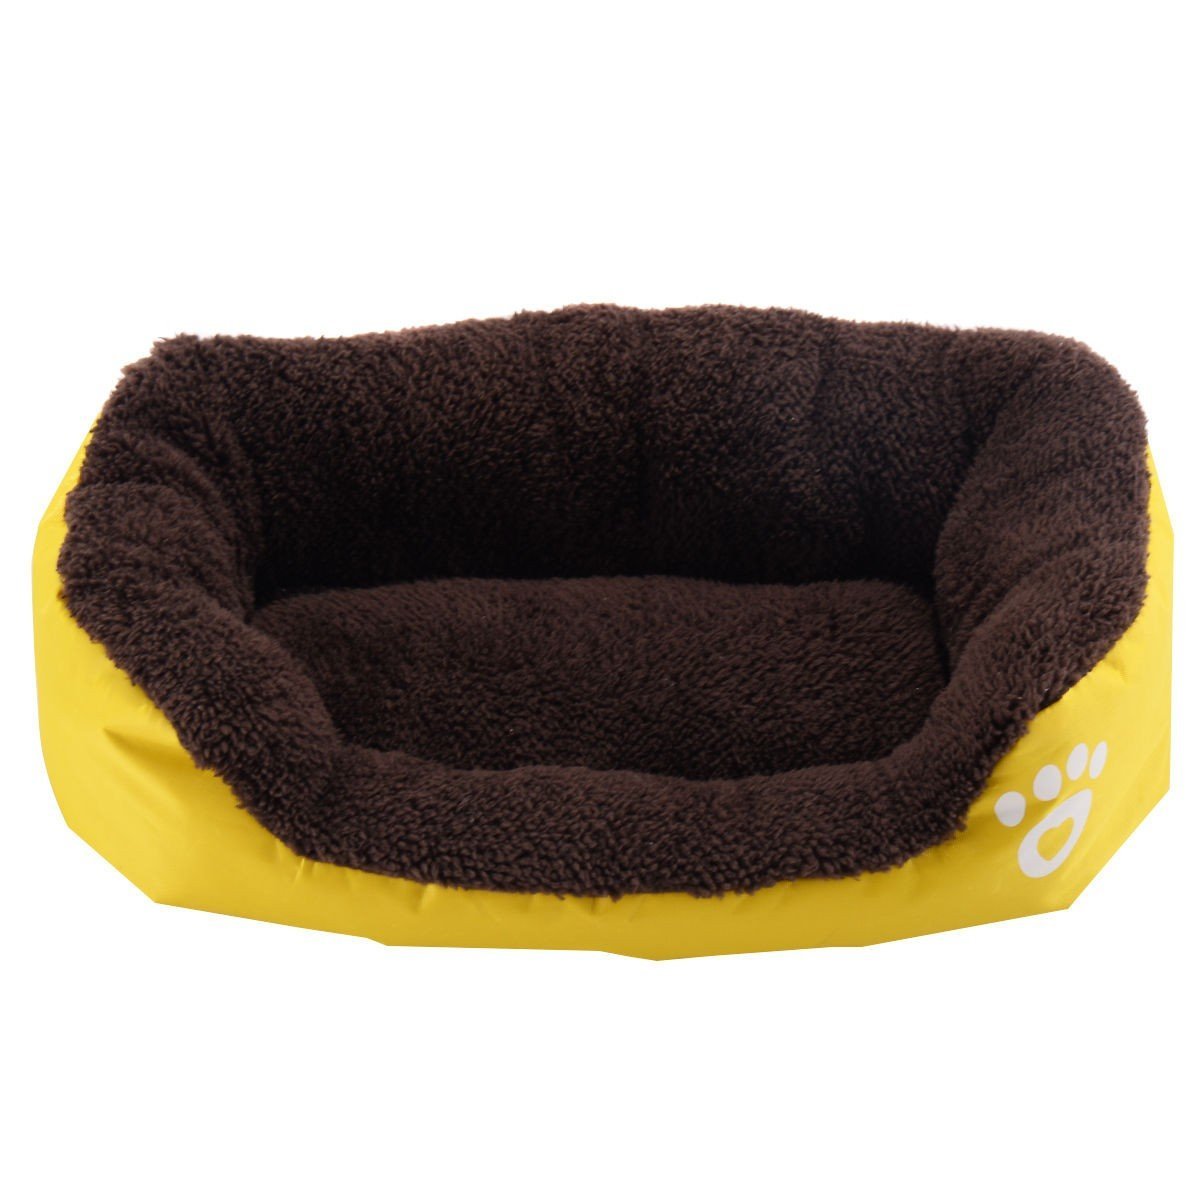 Costway Pet Dog Cat Bed Puppy Cushion House Soft Warm Kennel Mat Blanket 3 SIZE